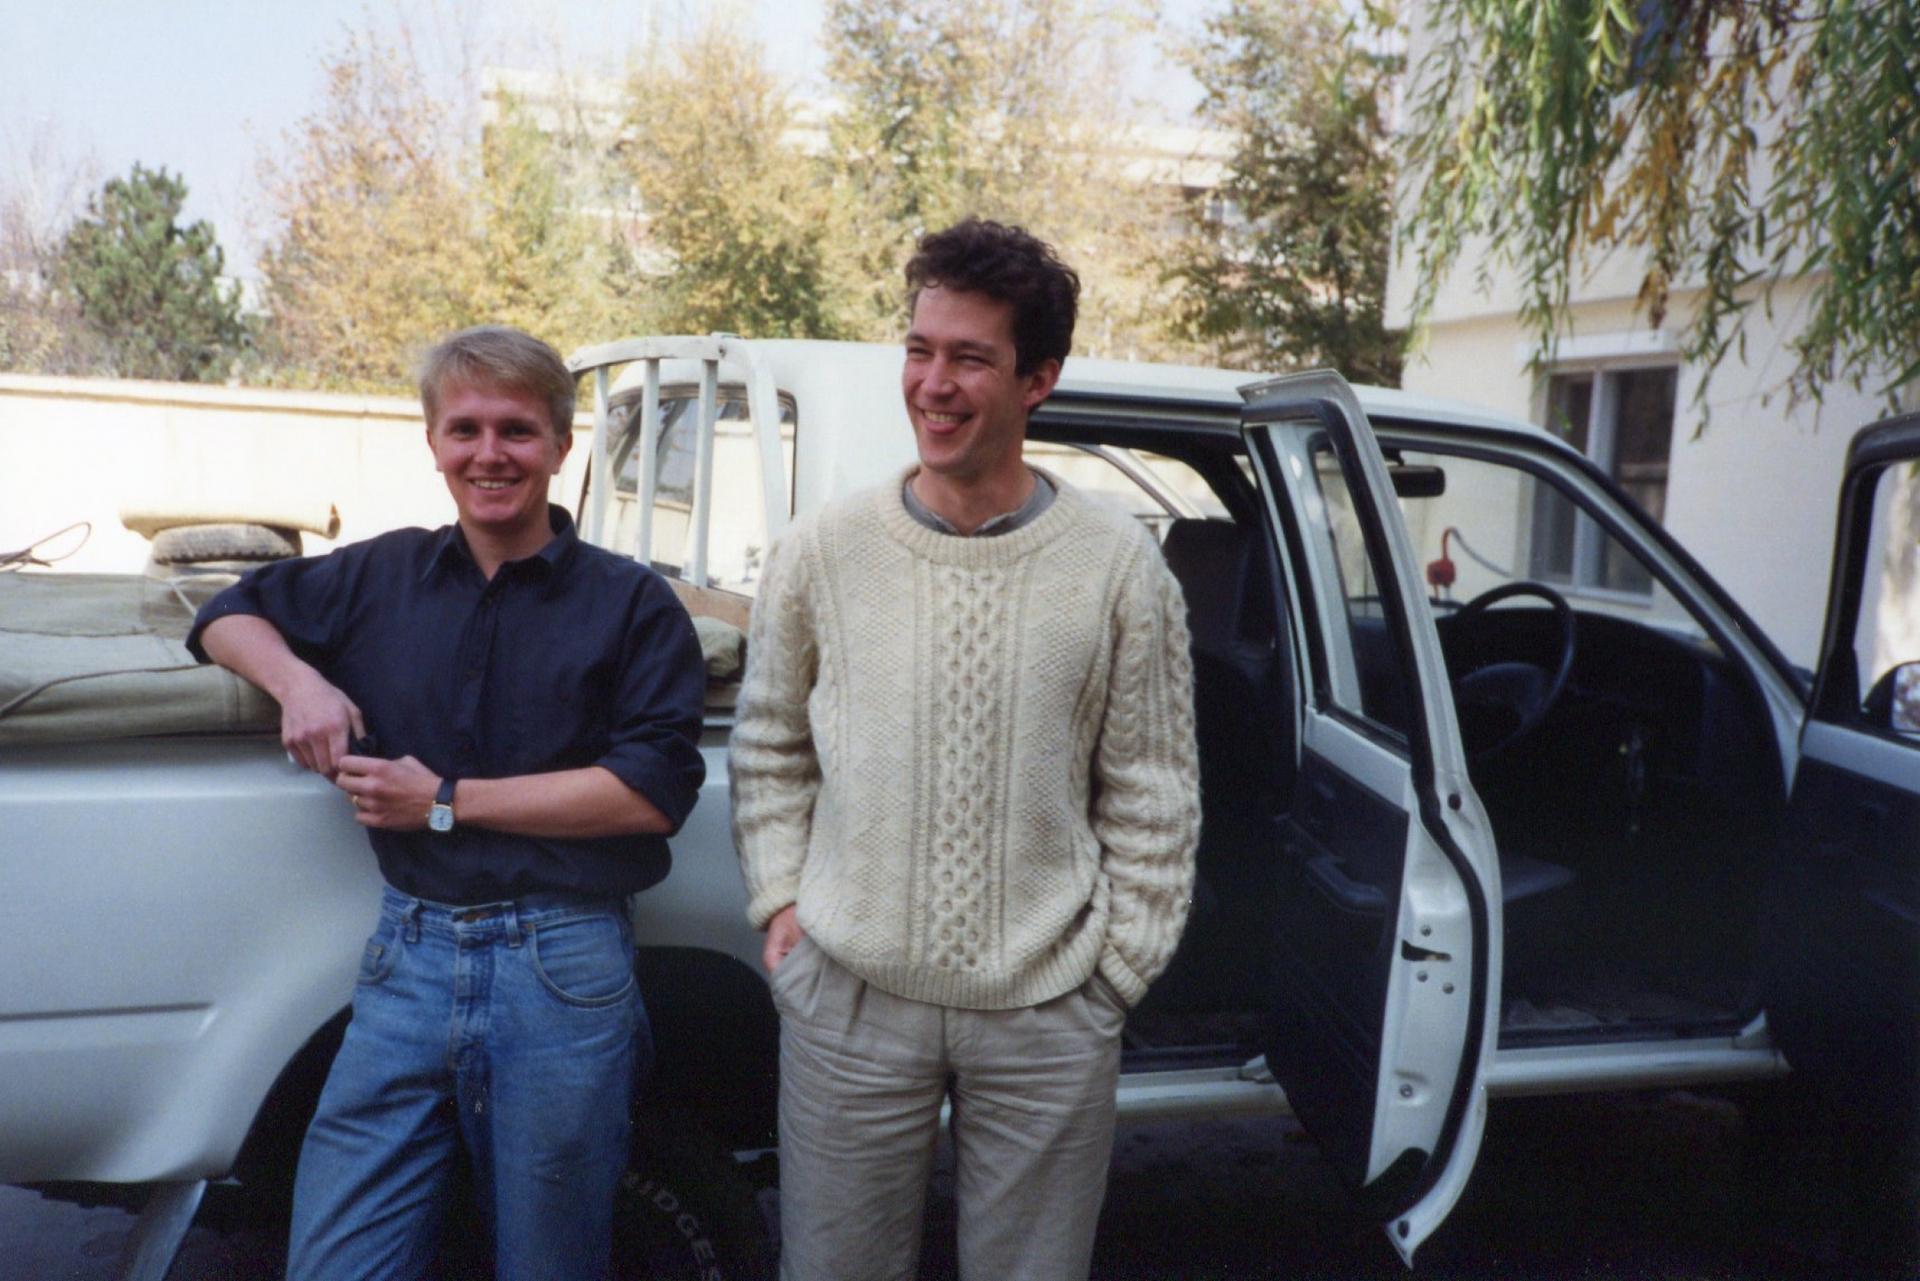 The author, Chris Woolf (left), and BBC colleague, Chris Bowers, at the beginning of the convoy, Nov. 7, 1991.